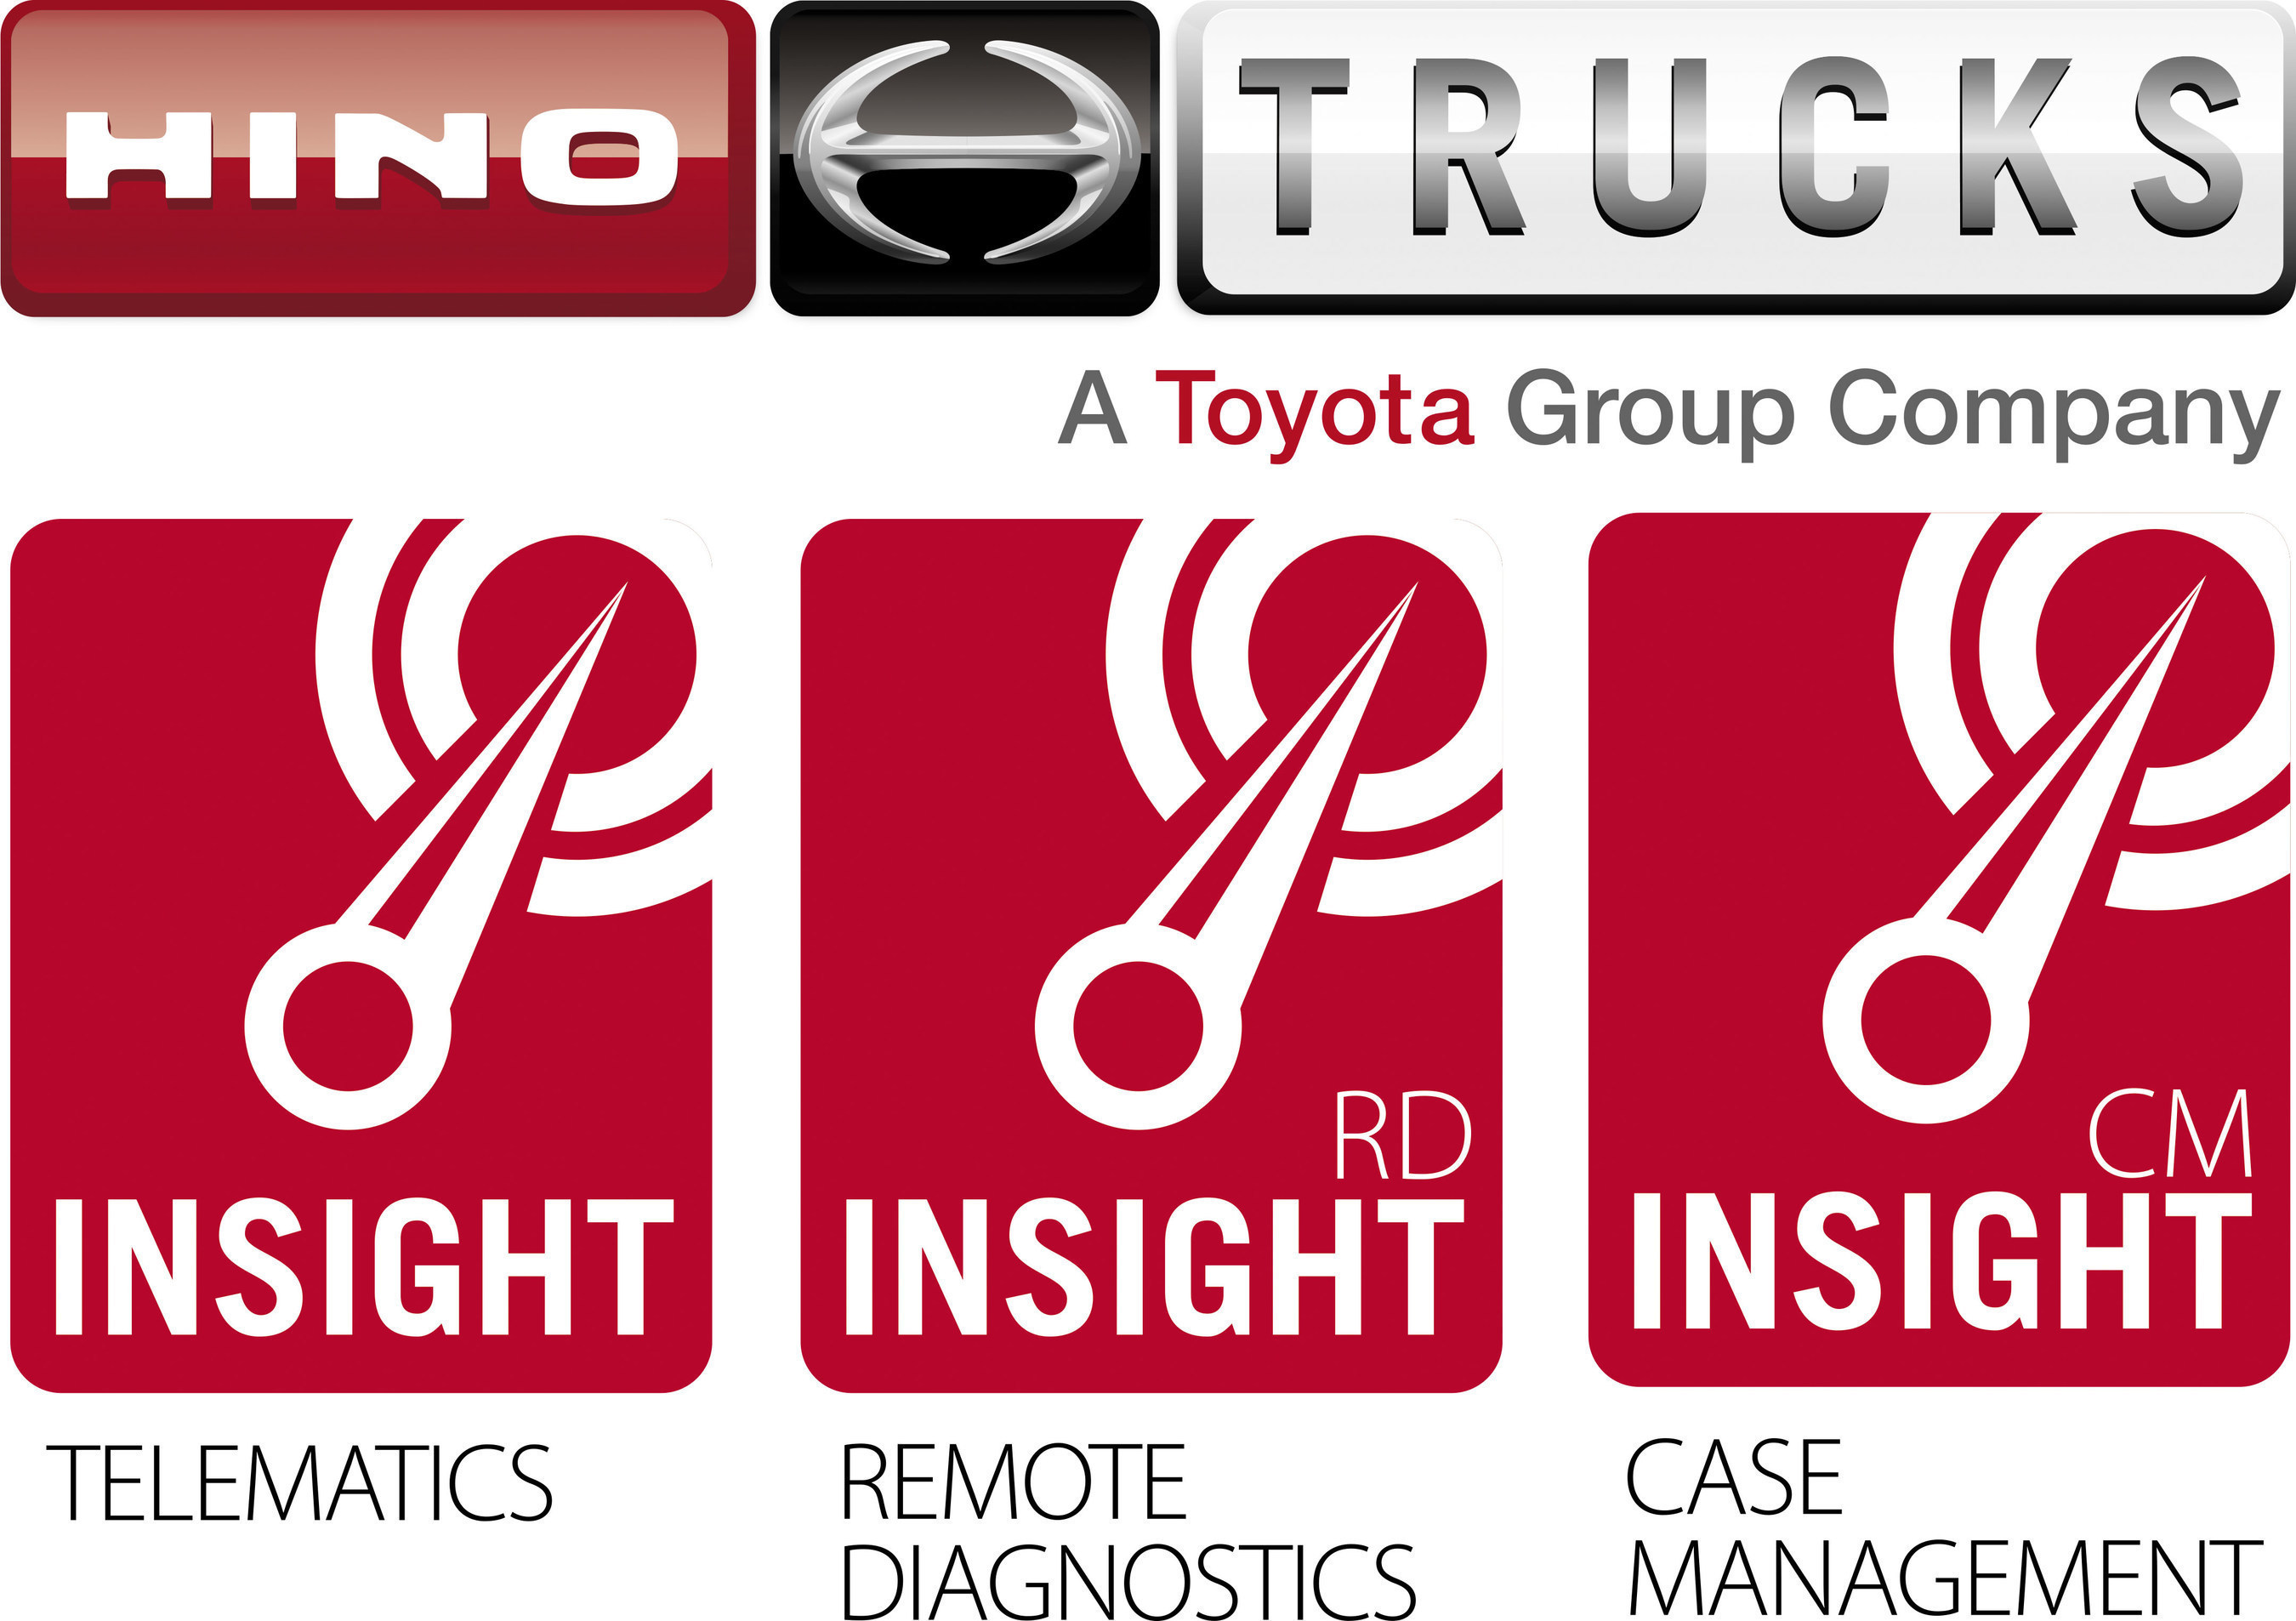 Hino's expanded INSIGHT platform delivers three key services to owners:  INSIGHT Telematics - powered by Telogis, INSIGHT Remote Diagnostics (INSIGHT RD) and INSIGHT Case Management (INSIGHT CM) - powered by Decisiv.